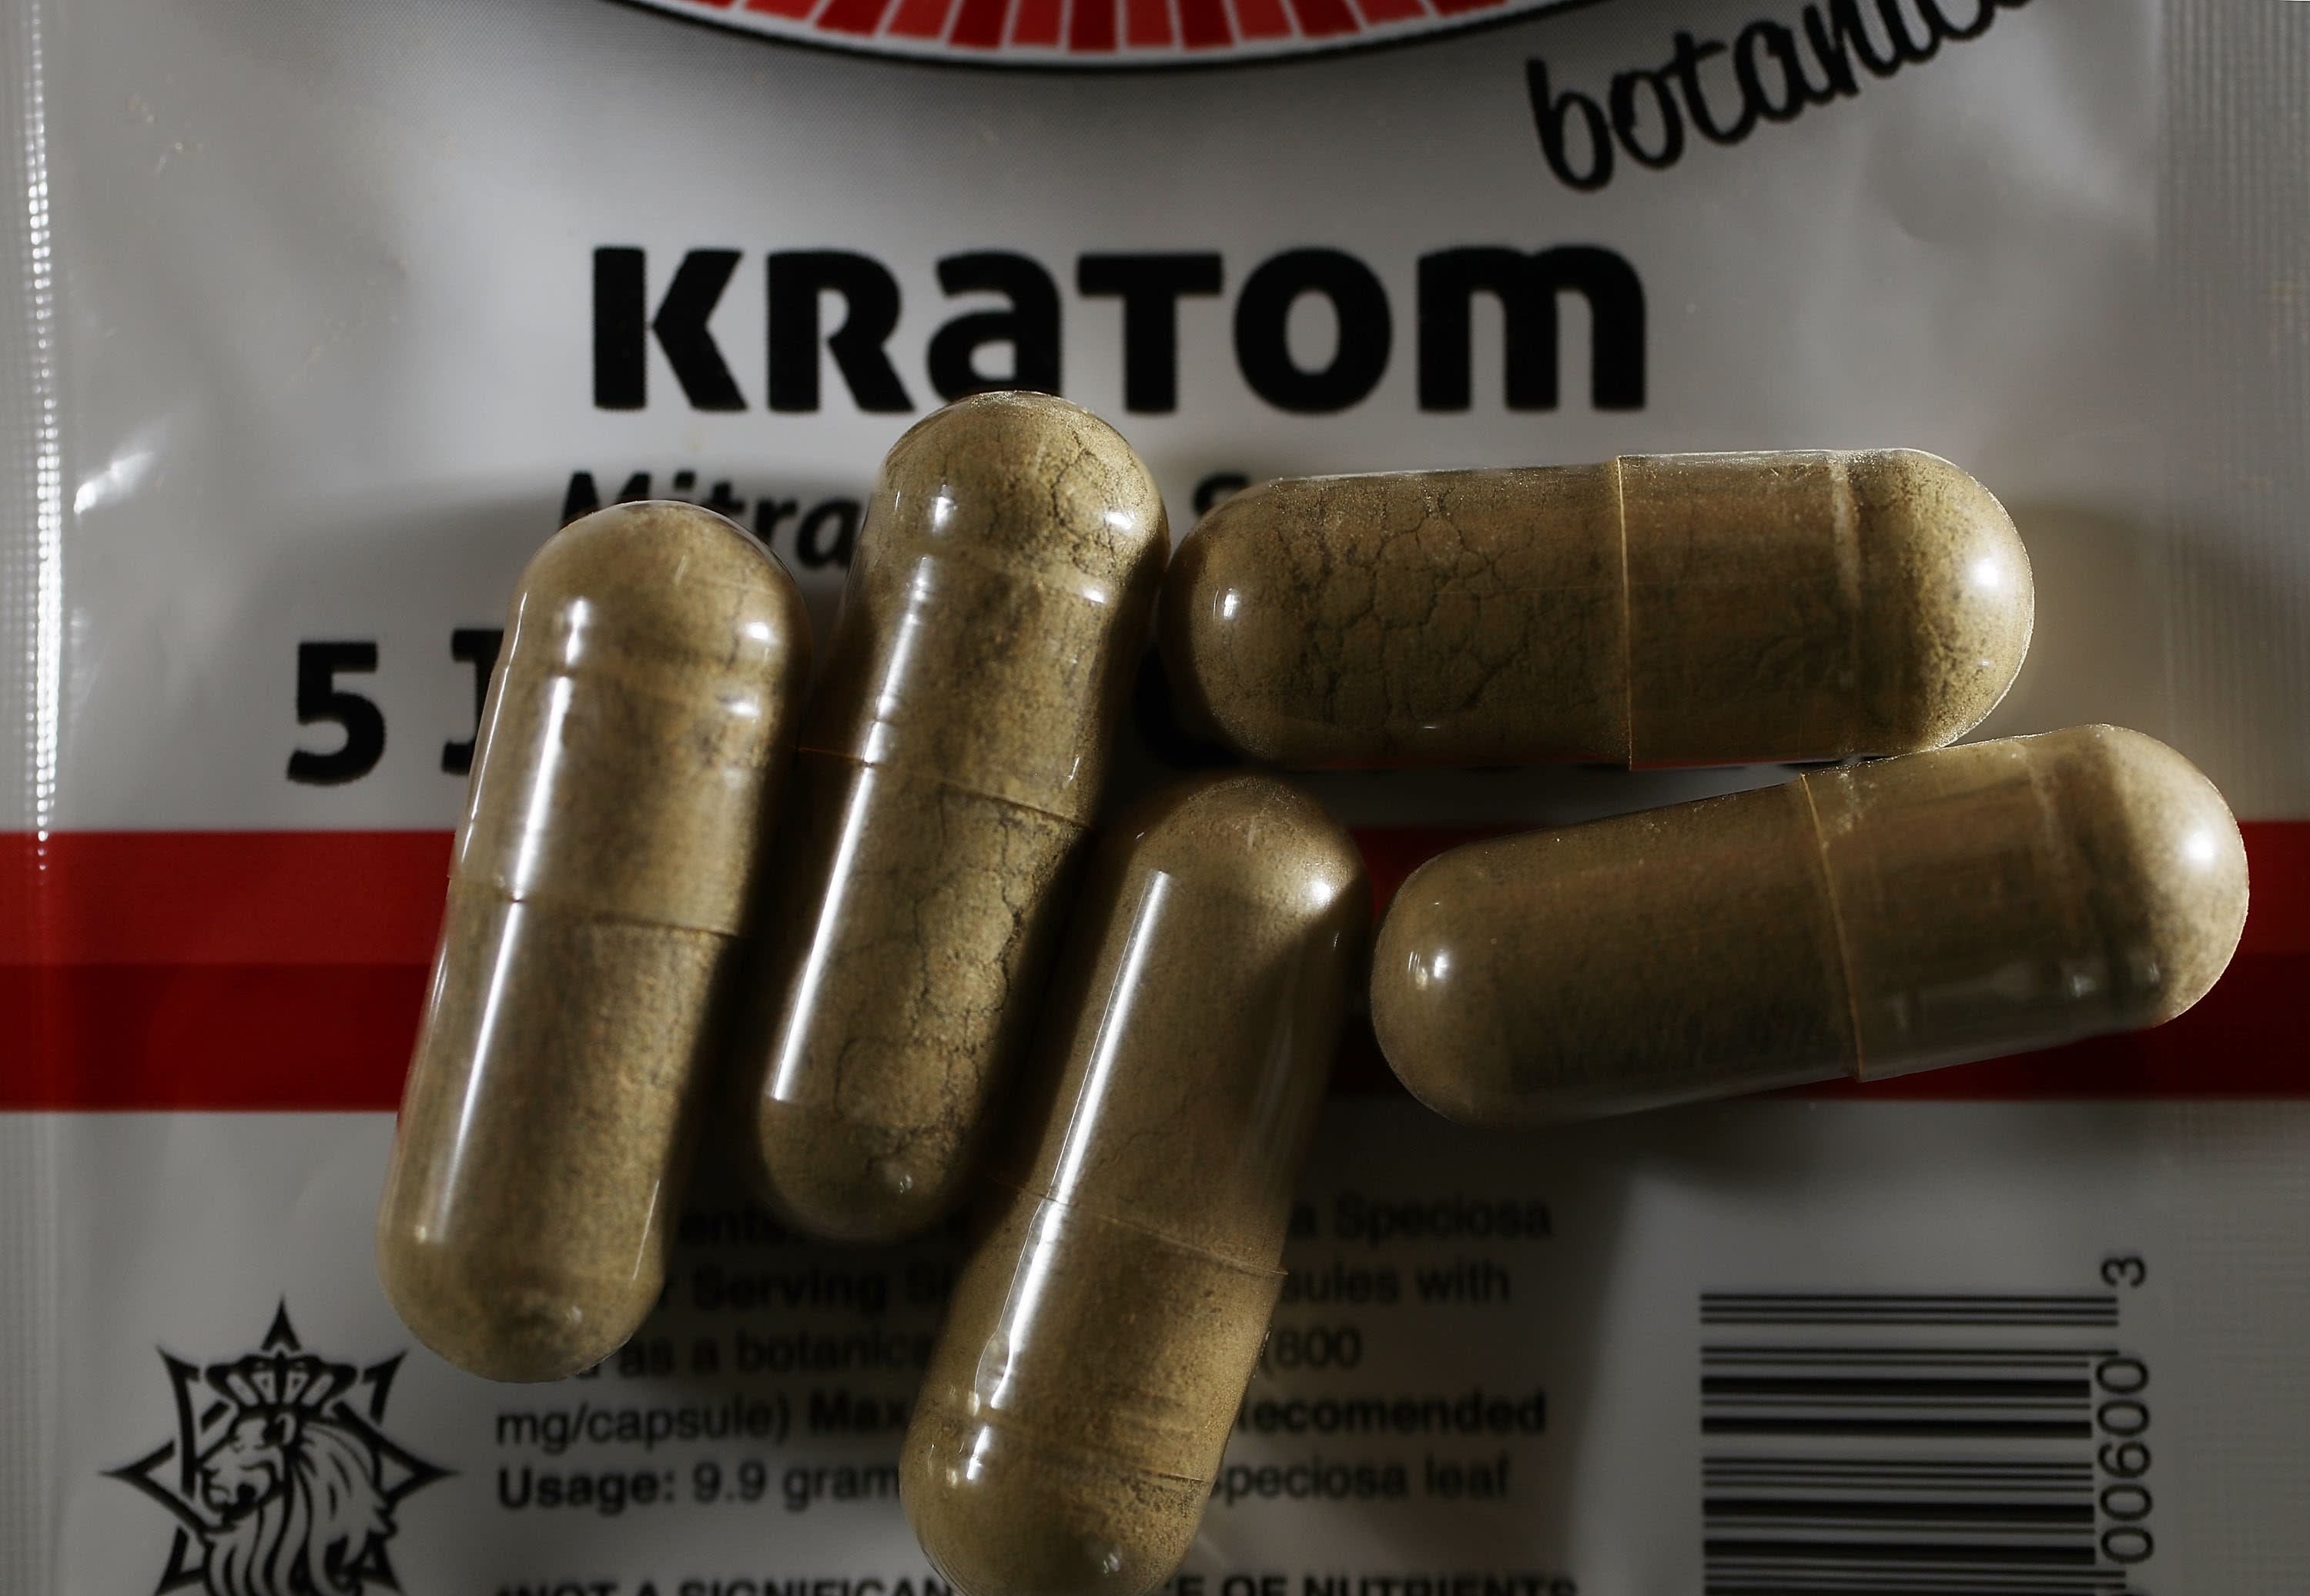 Kratom Tea is the Focus of a Florida Lawsuit—and FDA Scrutiny. Here's Why